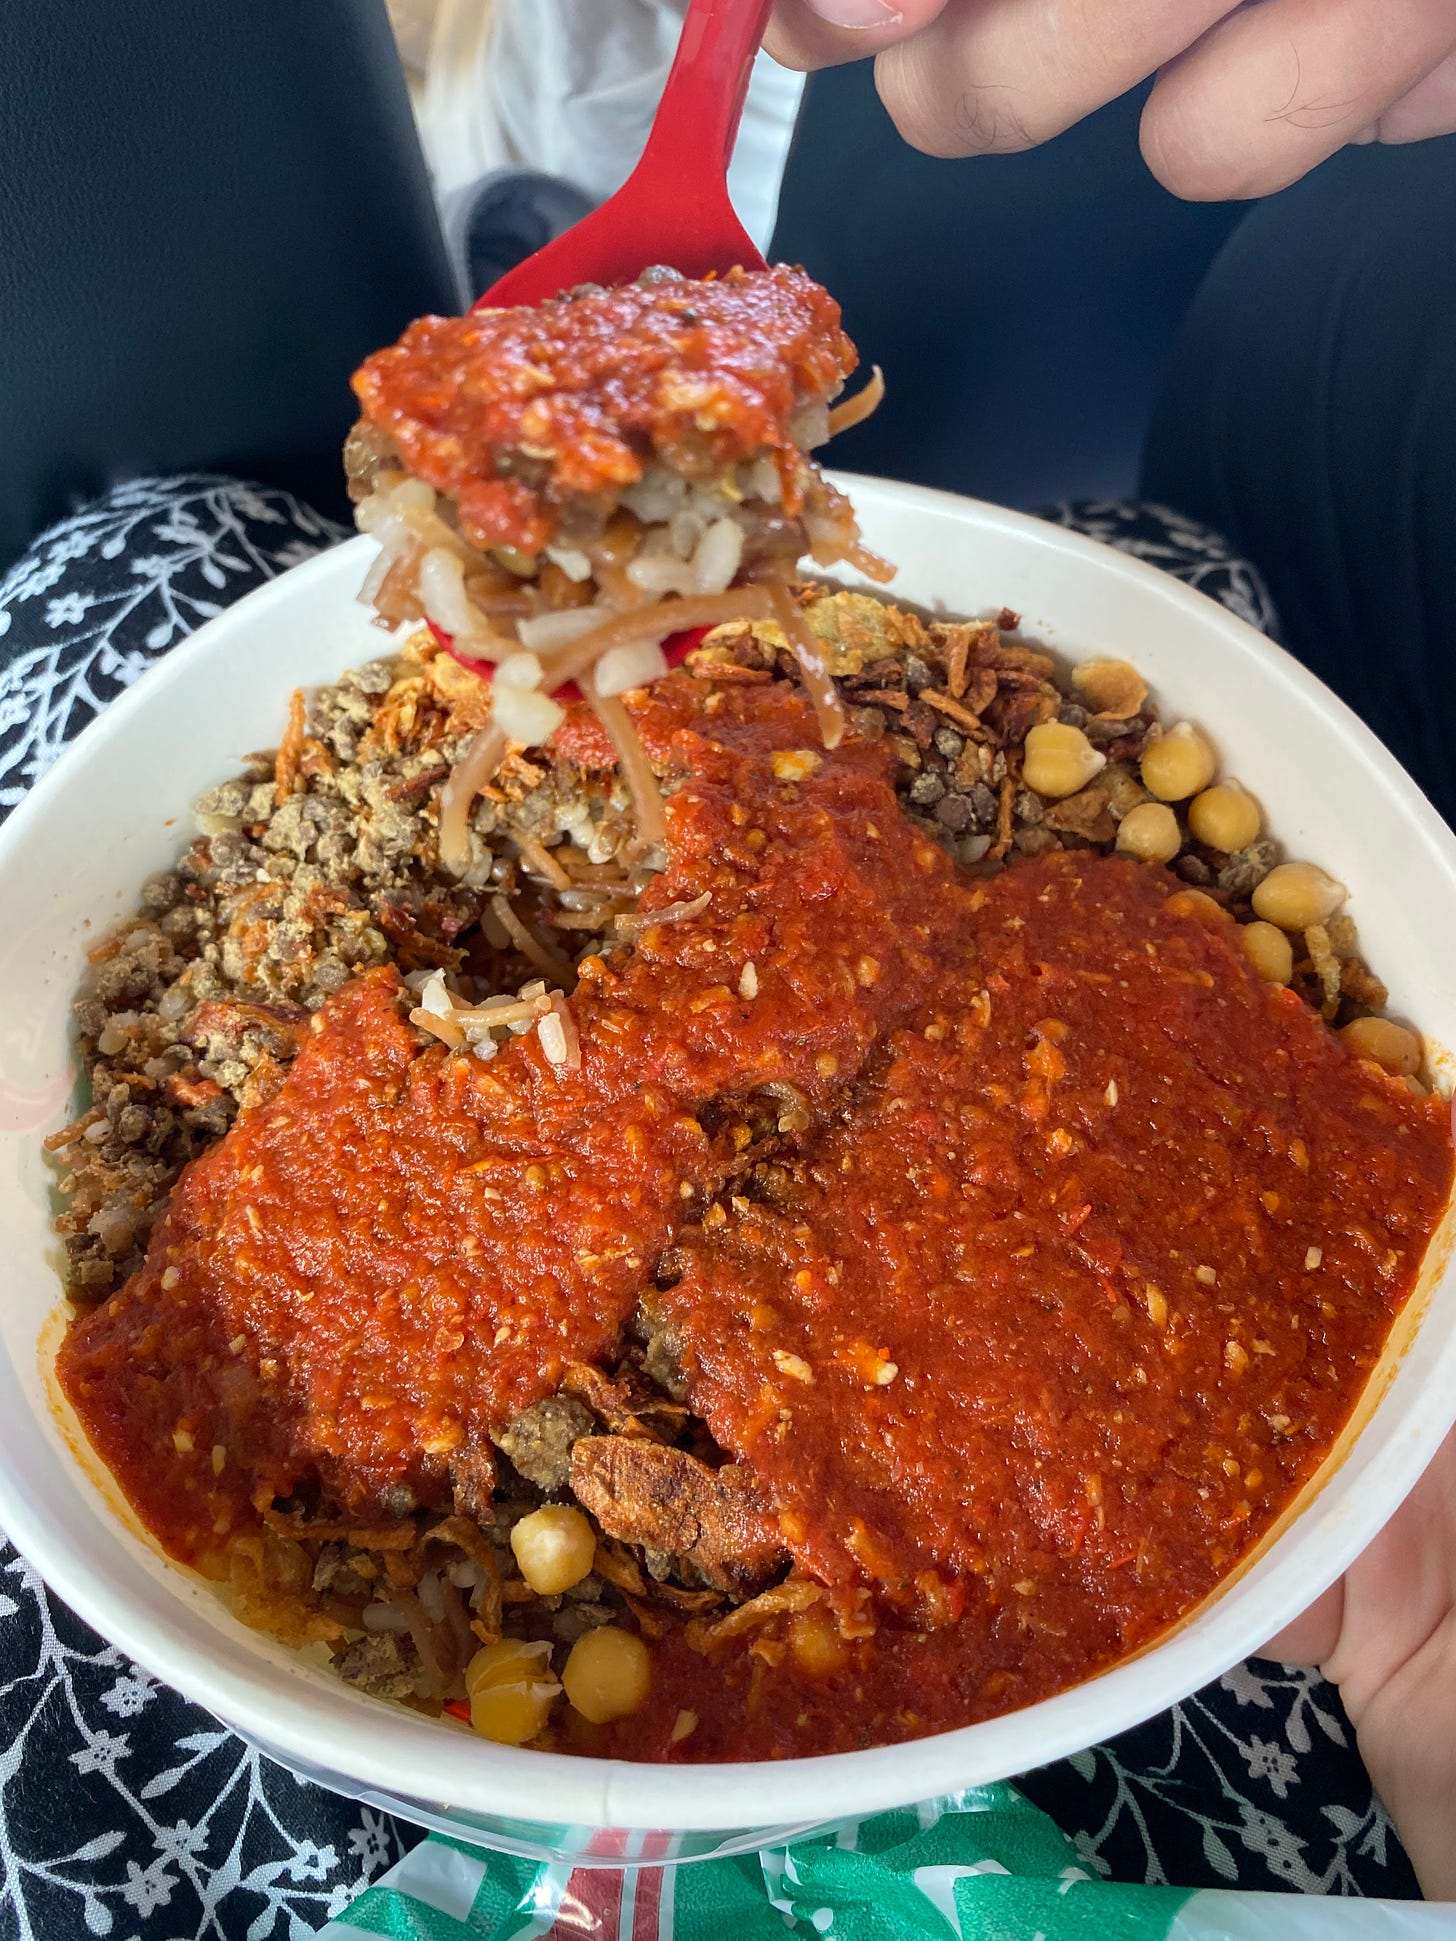 A bowl of lentils and chickpeas covered in tomato sauce